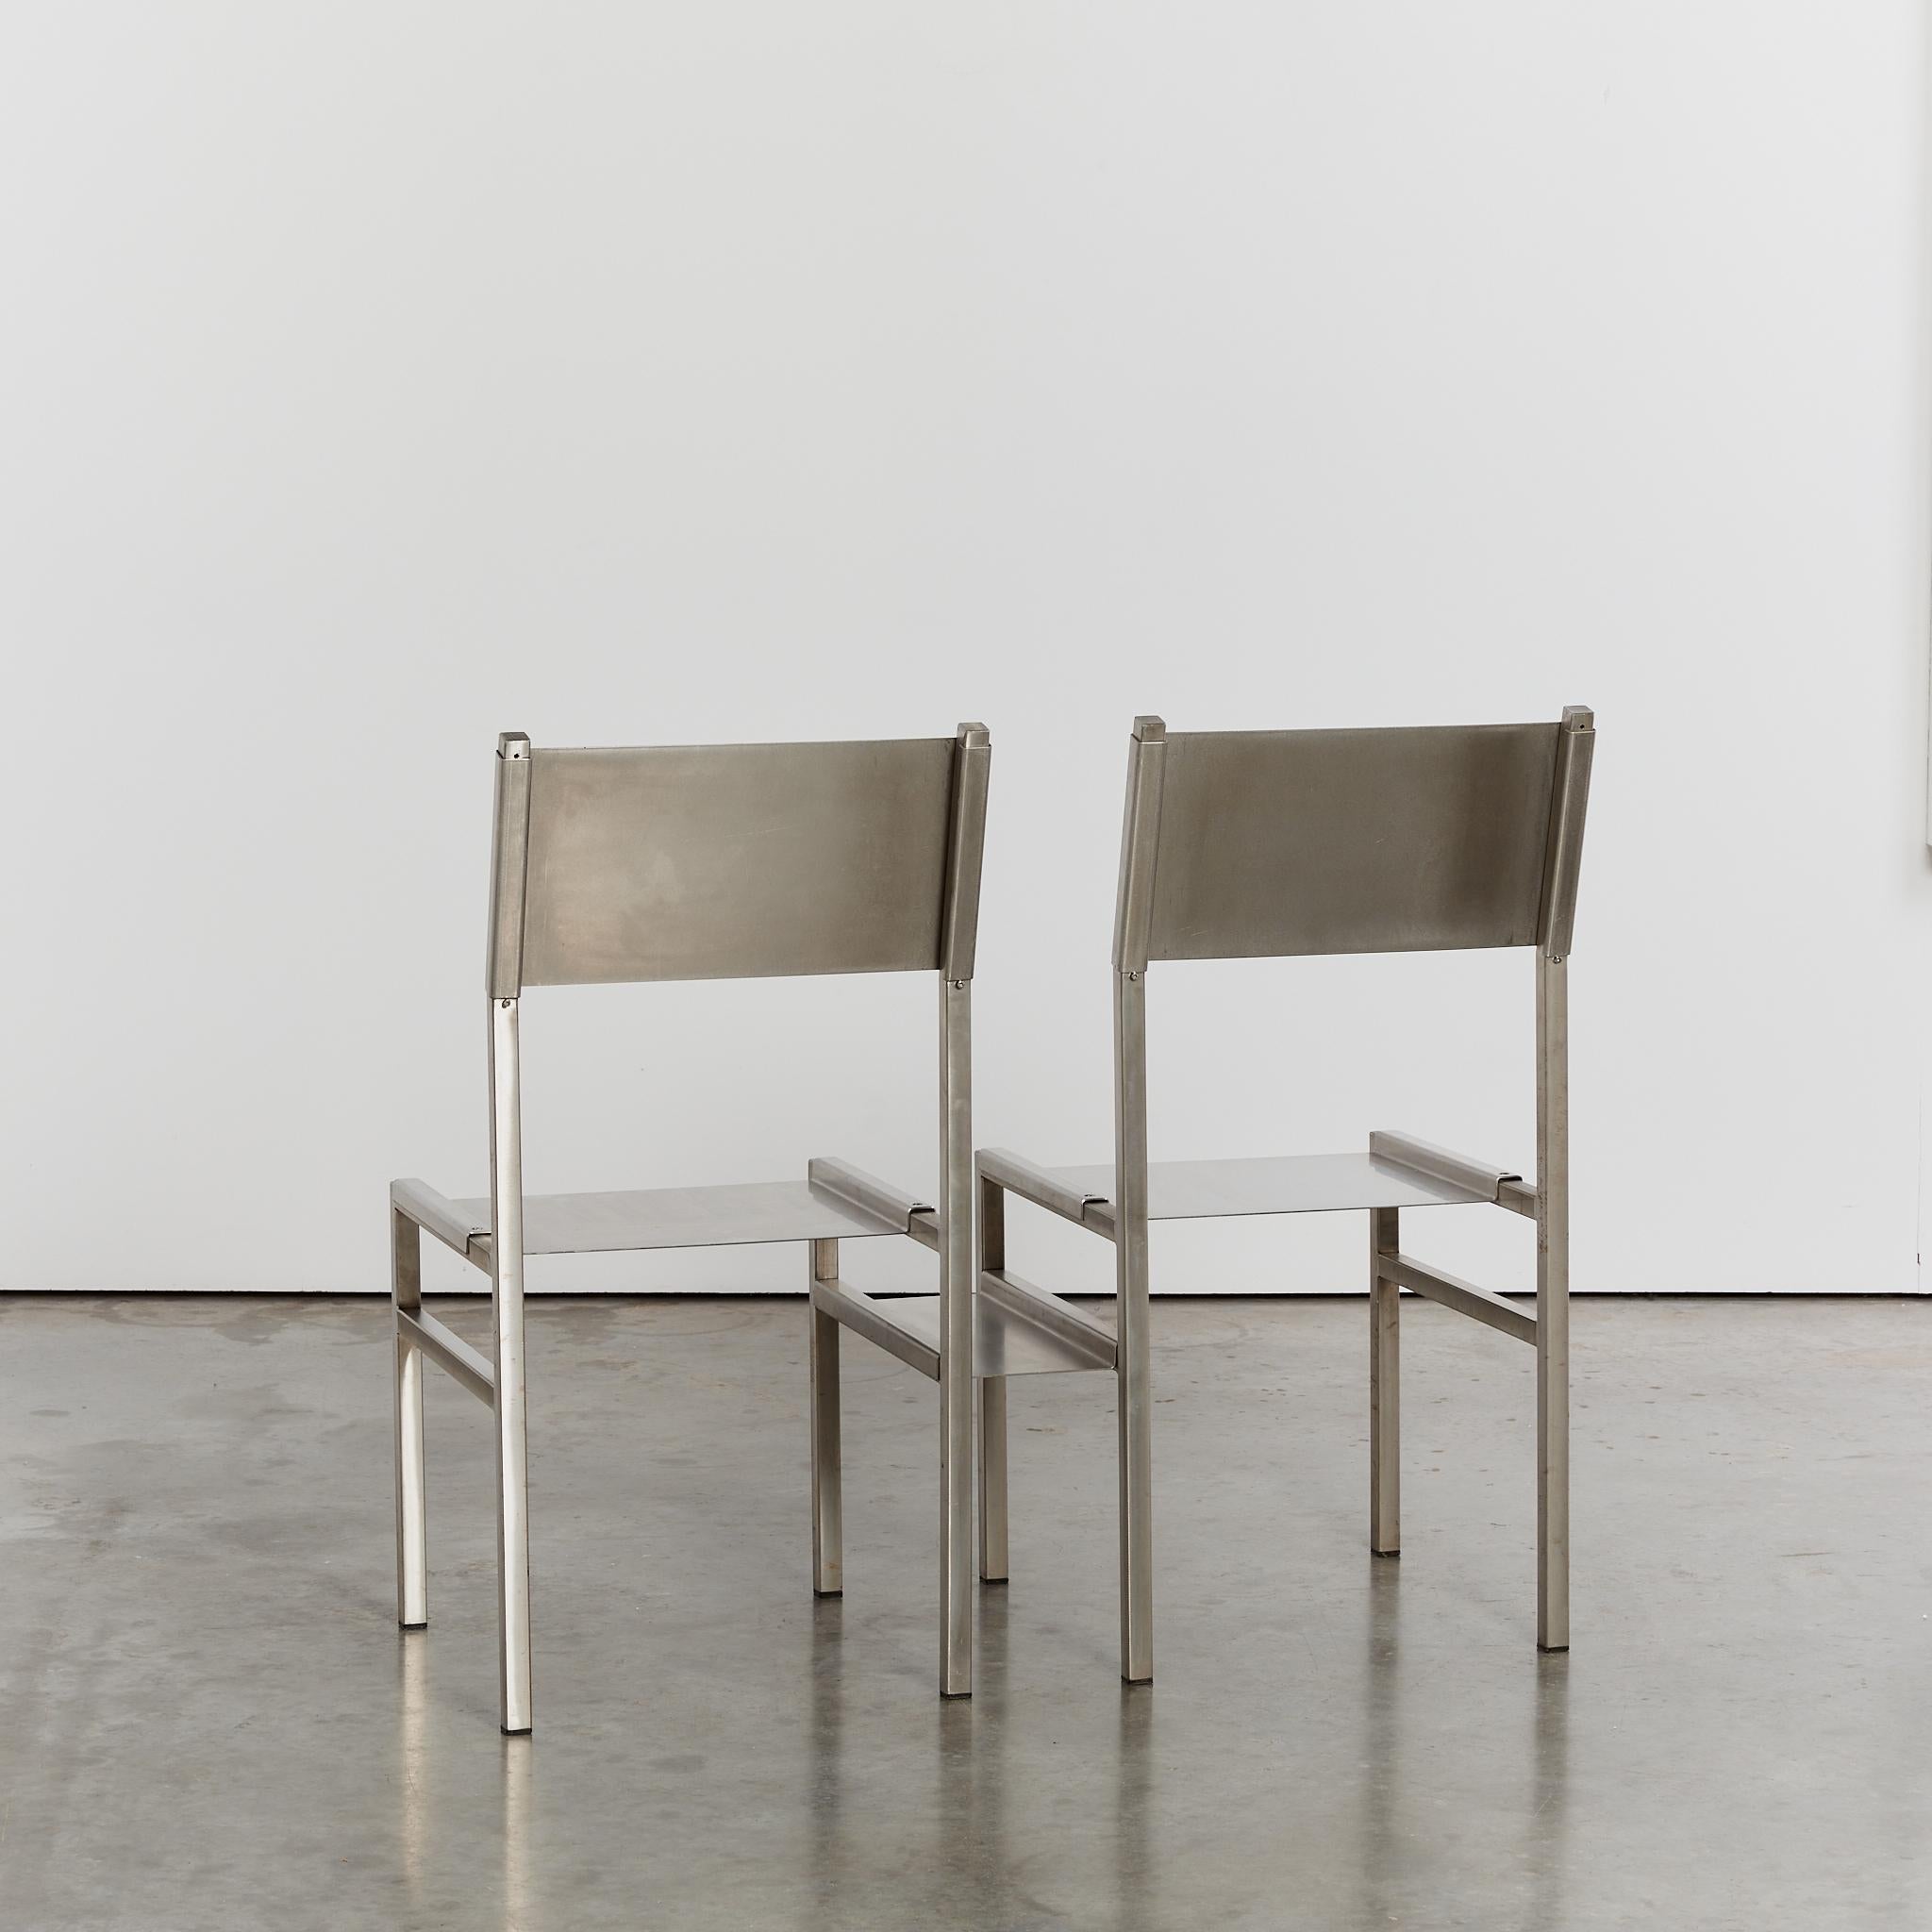 20th Century Stainless steel post modern Plugin loveseat by Christoph Siebrasse, edition of 6 For Sale